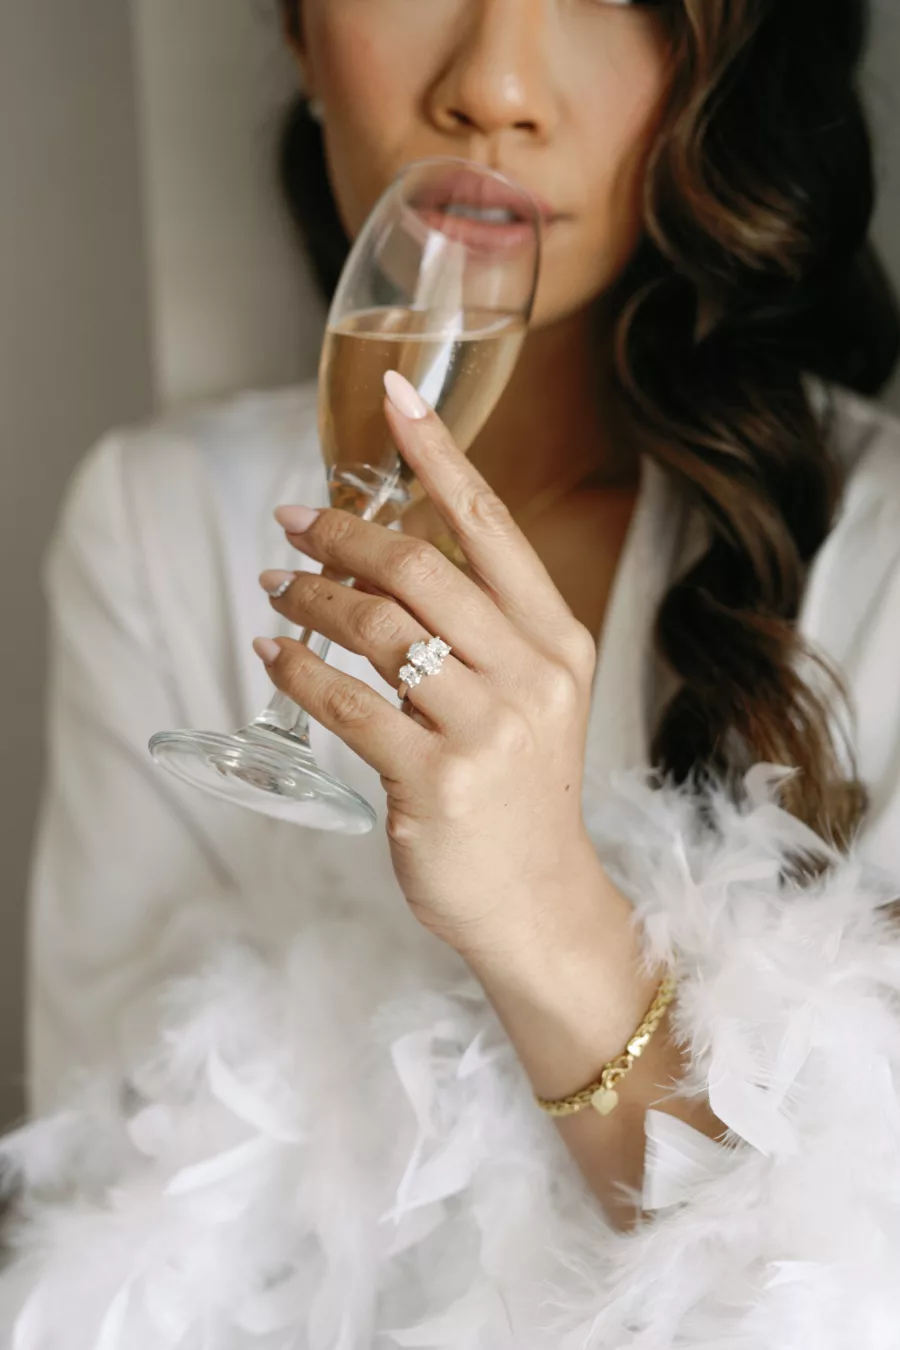 Three Stone Oval Engagement Ring | Wedding Day Robe with Feathers Inspiration | Tampa Bay Hair and Makeup Artist Femme Akoi Beauty Studio | Photographer Dewitt for Love Photography